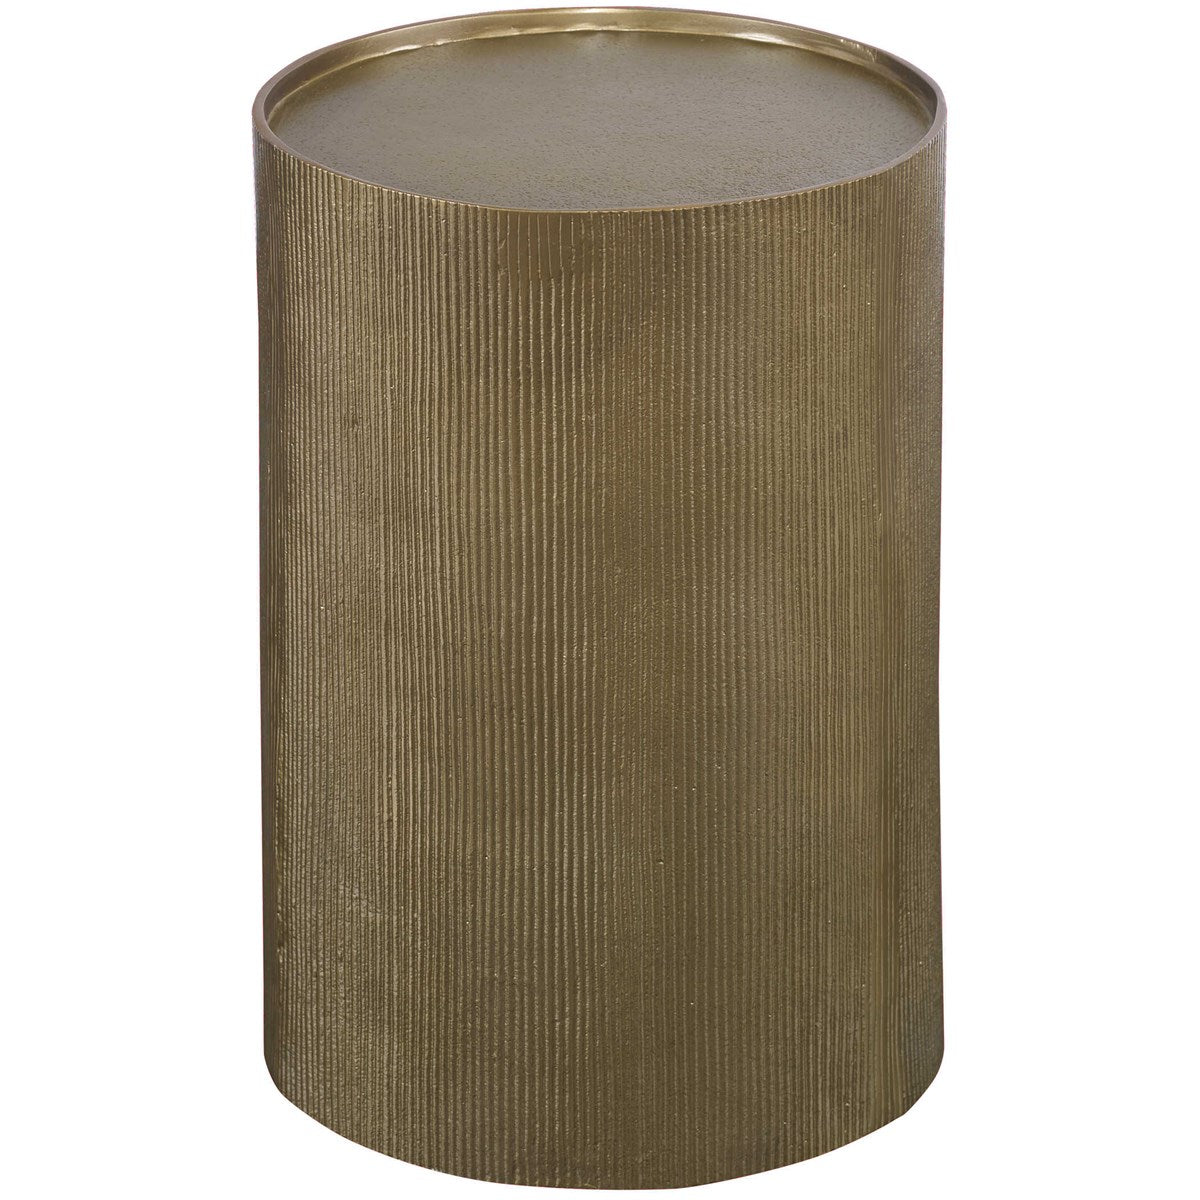 Uttermost, Adrina Accent Table